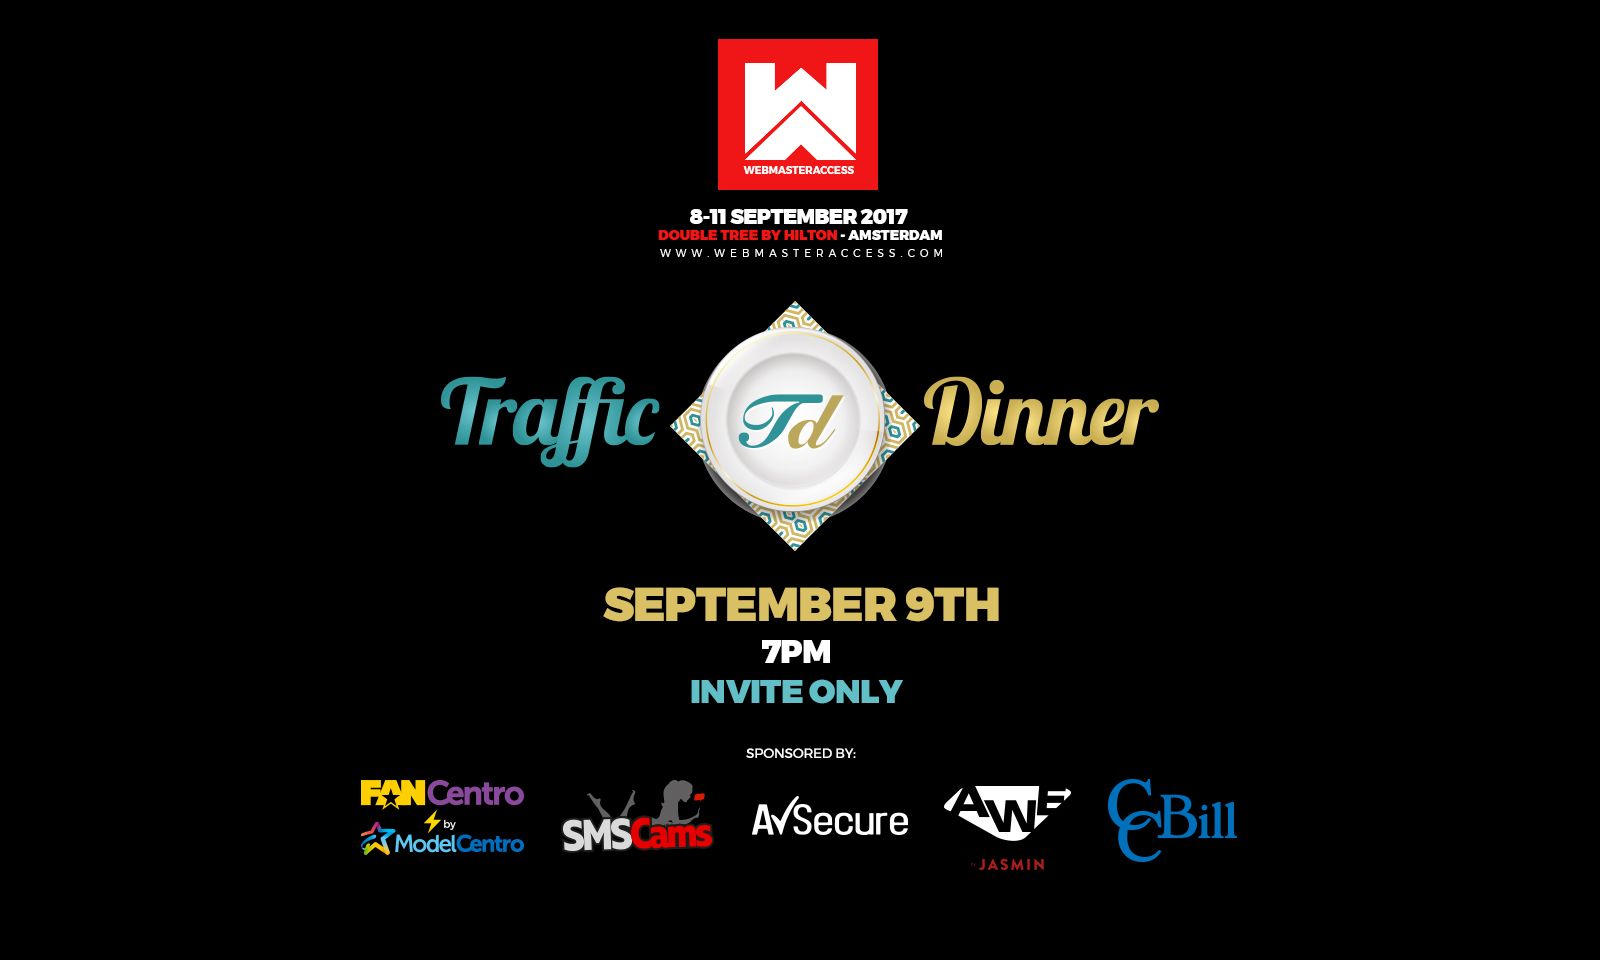 Sponsors Announced for Traffic Dinner at Webmaster Access 2017